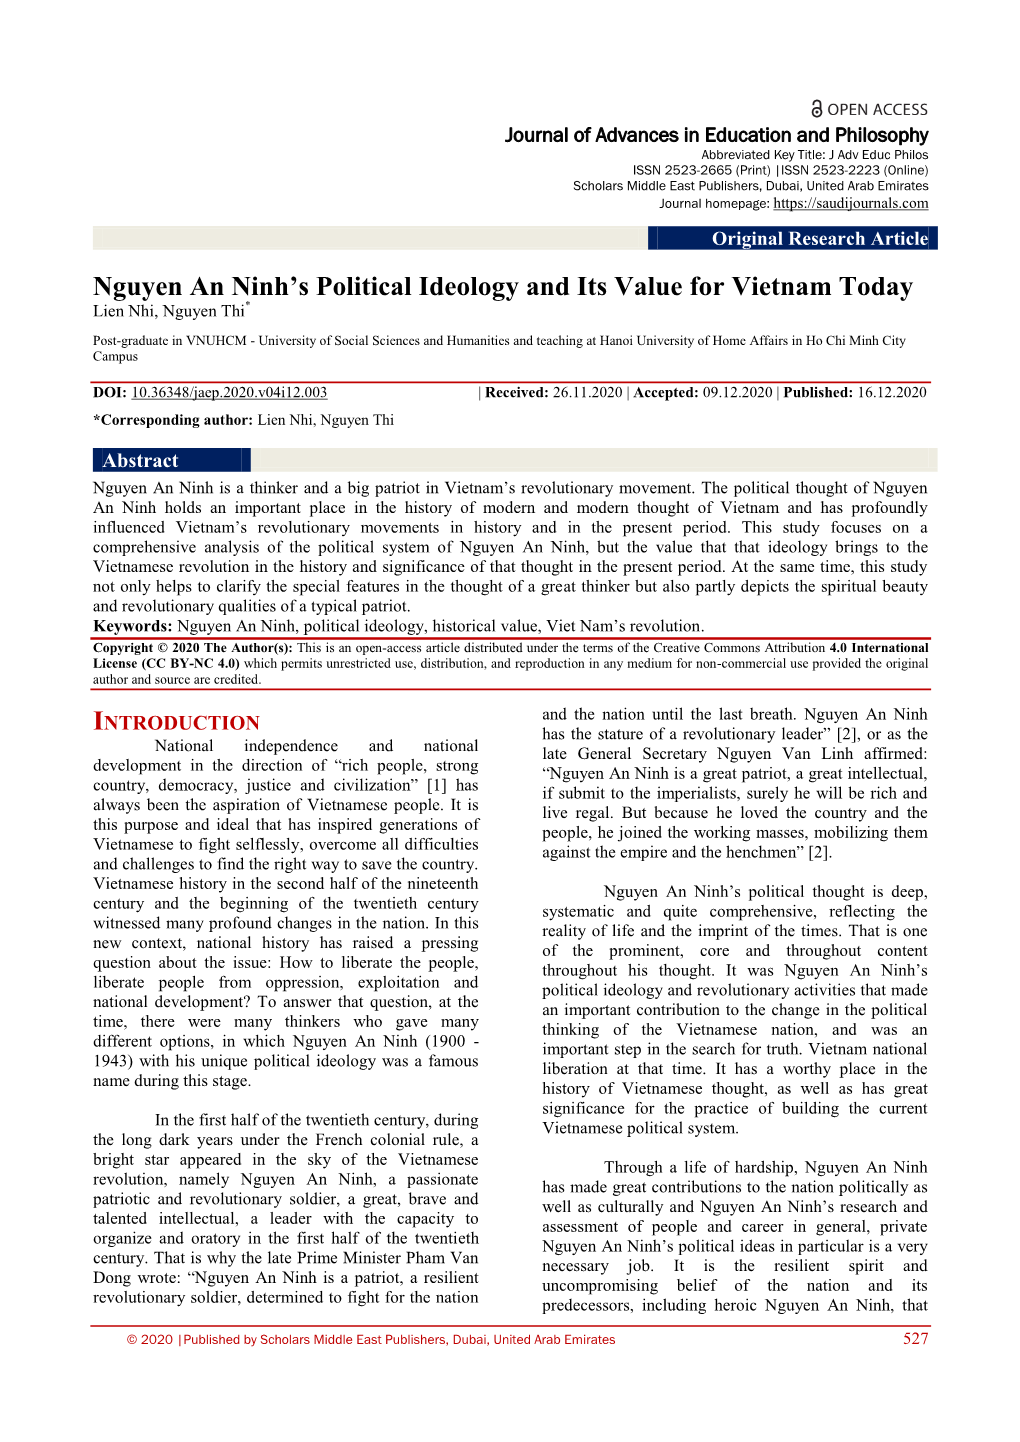 Nguyen an Ninh's Political Ideology and Its Value for Vietnam Today